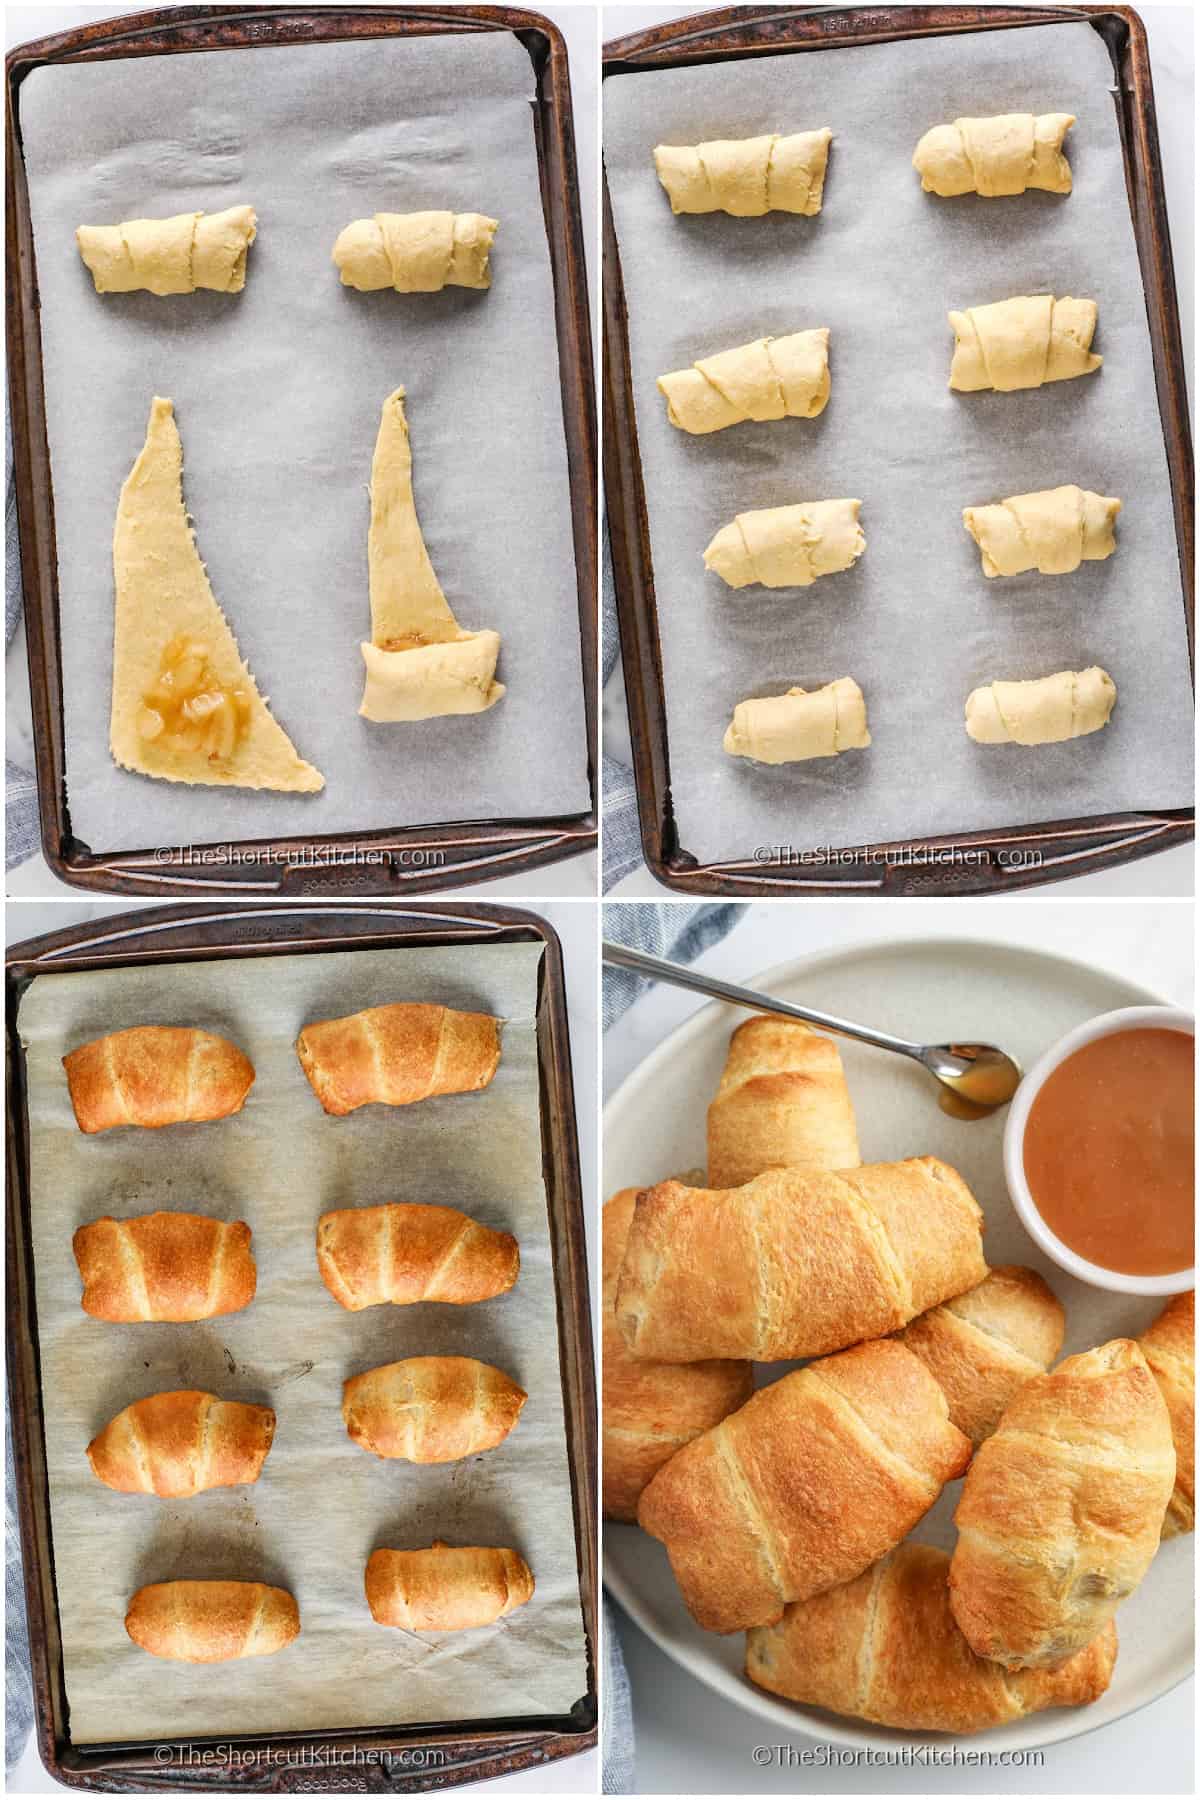 process to make this Easy Apple Turnovers recipe